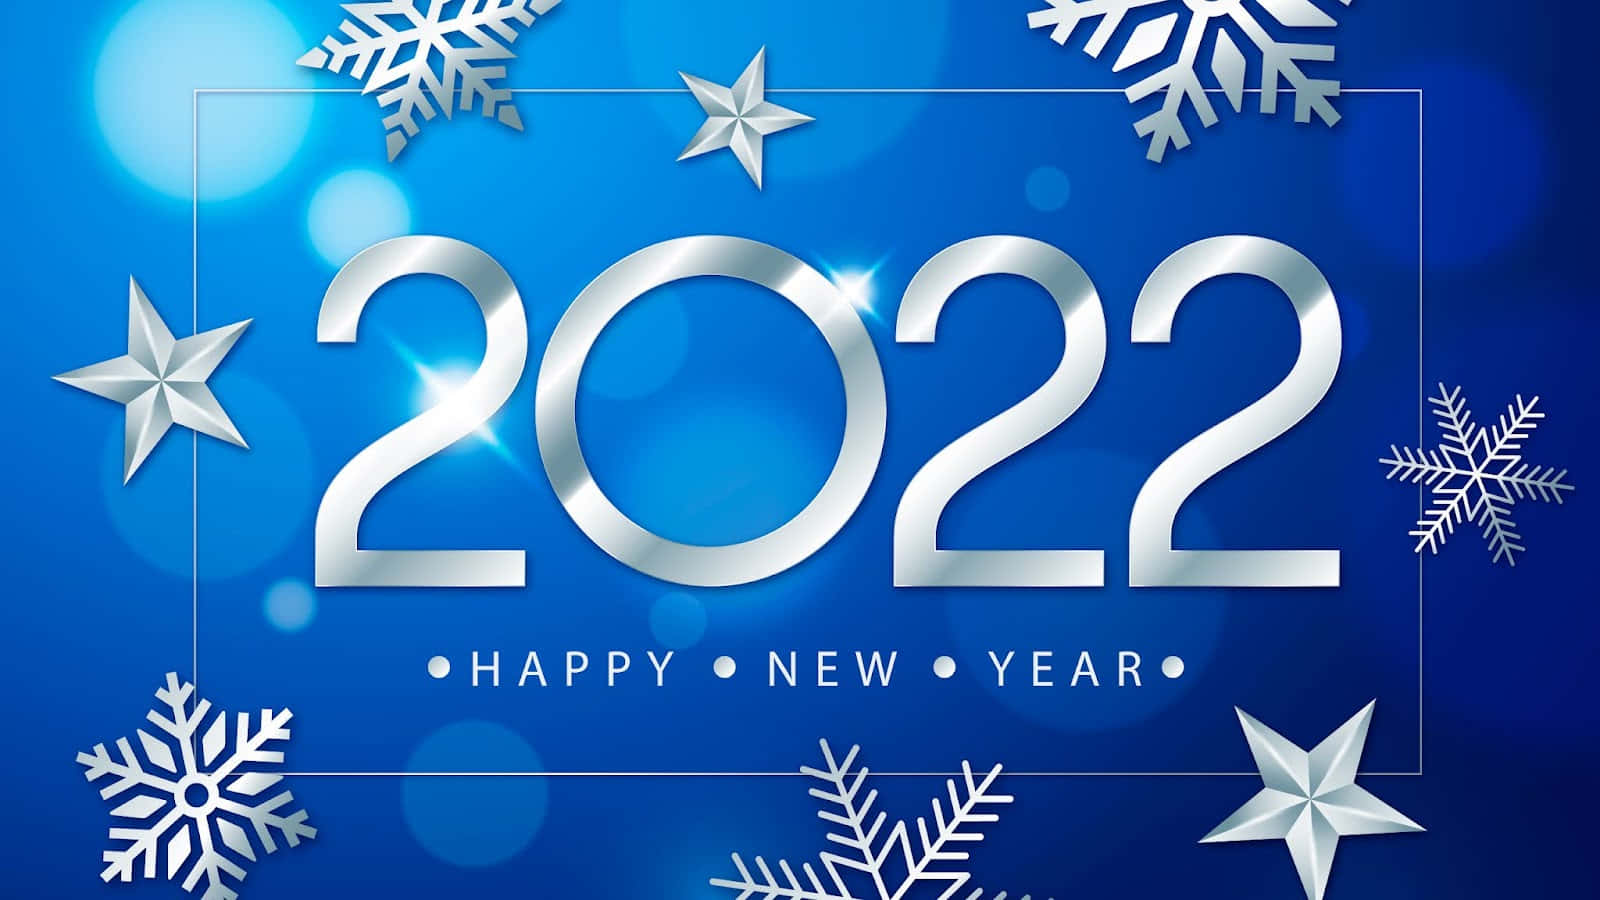 Happy New Year 2020 With Snowflakes And Silver Letters